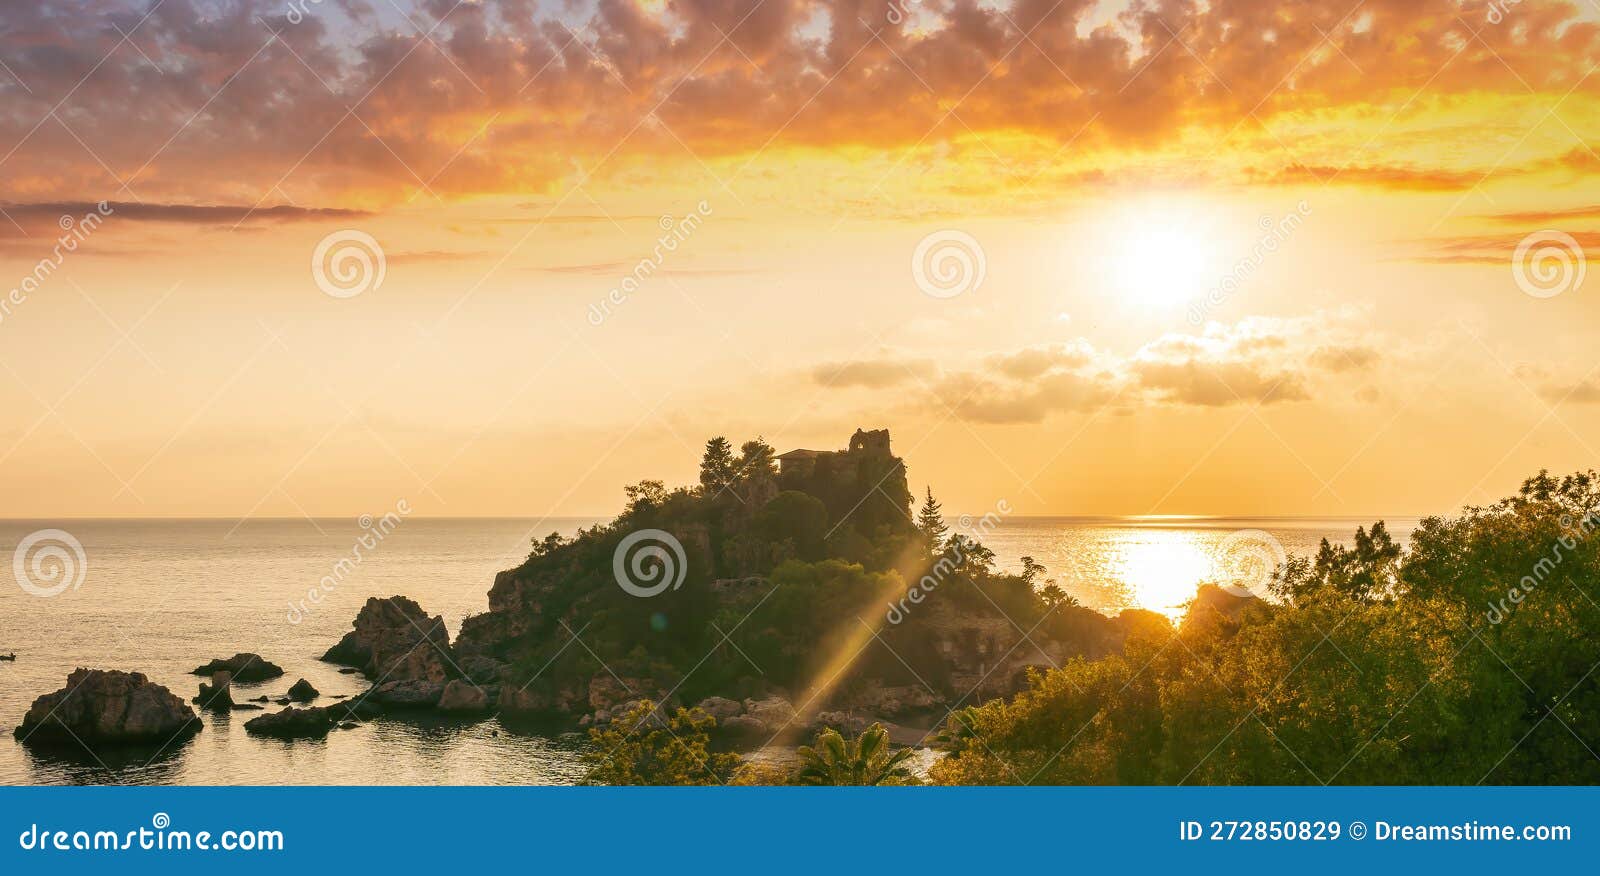 amazing view to a sunrise or sunset above beautiful isle in sea with nice coasline and clouds on the background of the evening sea